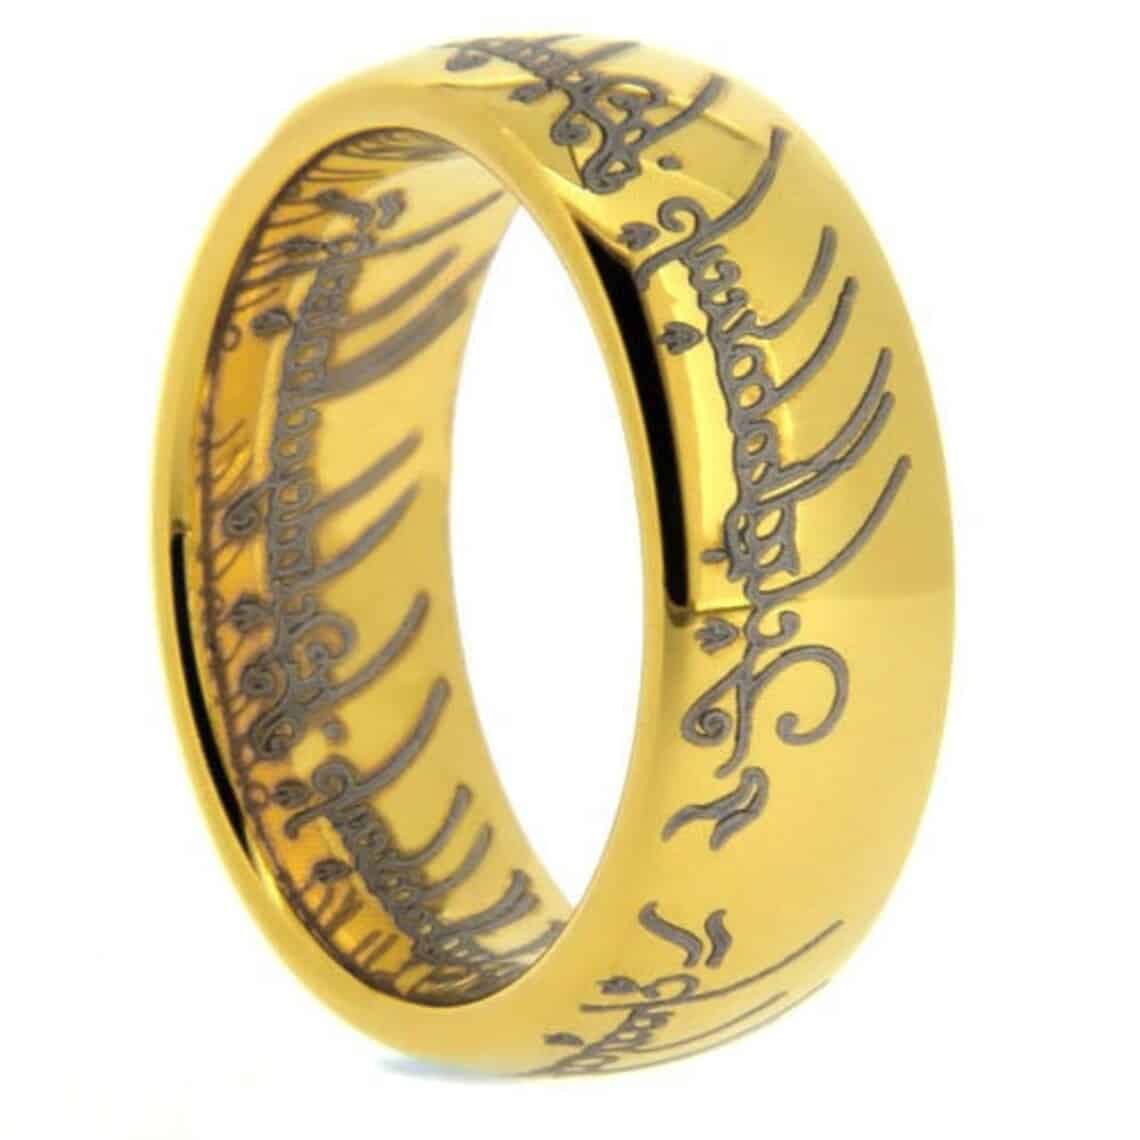 Golden ring with writing on it.